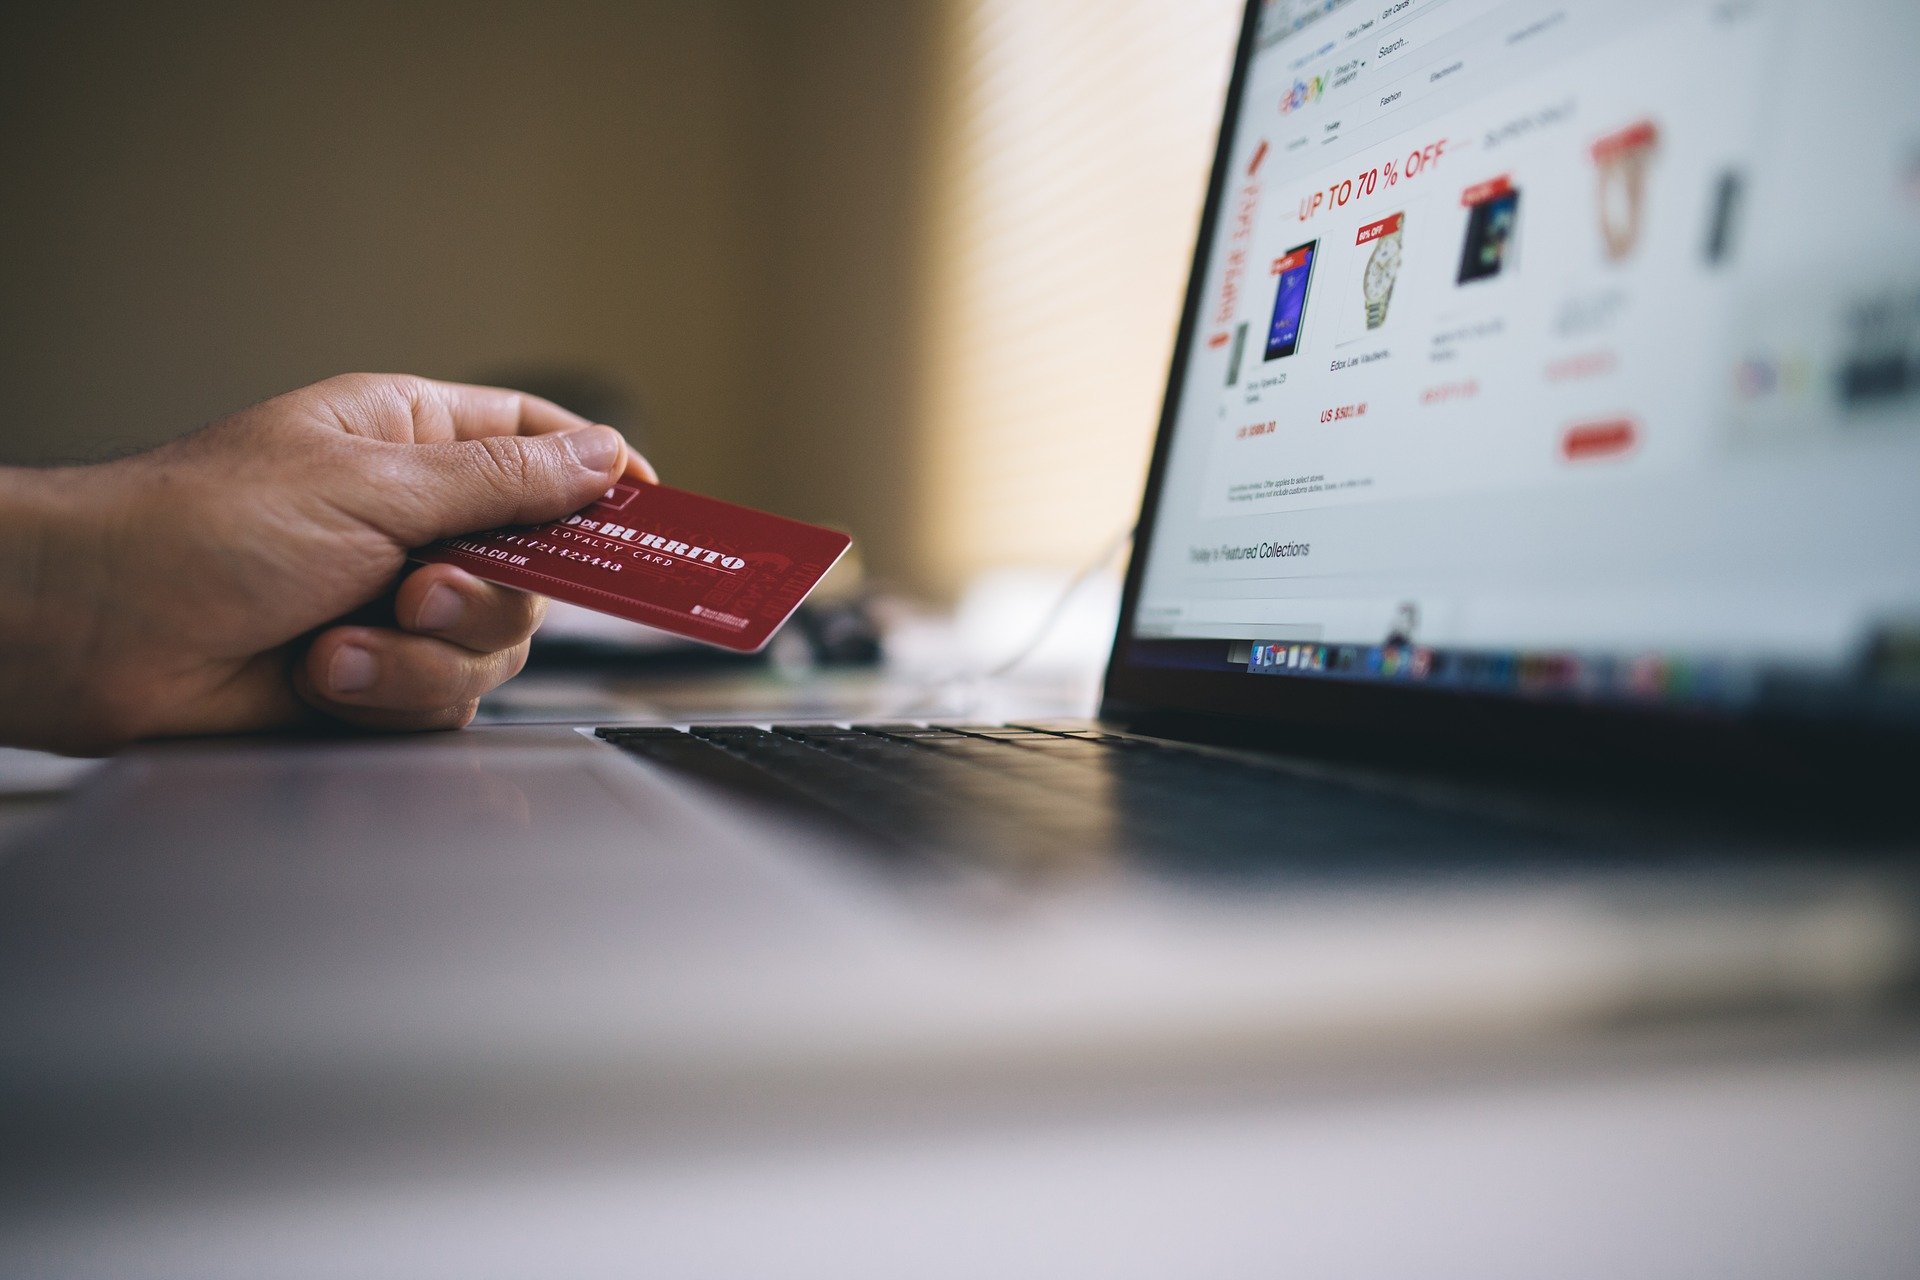 7 Critical Skills For Running a Successful E-Commerce Business